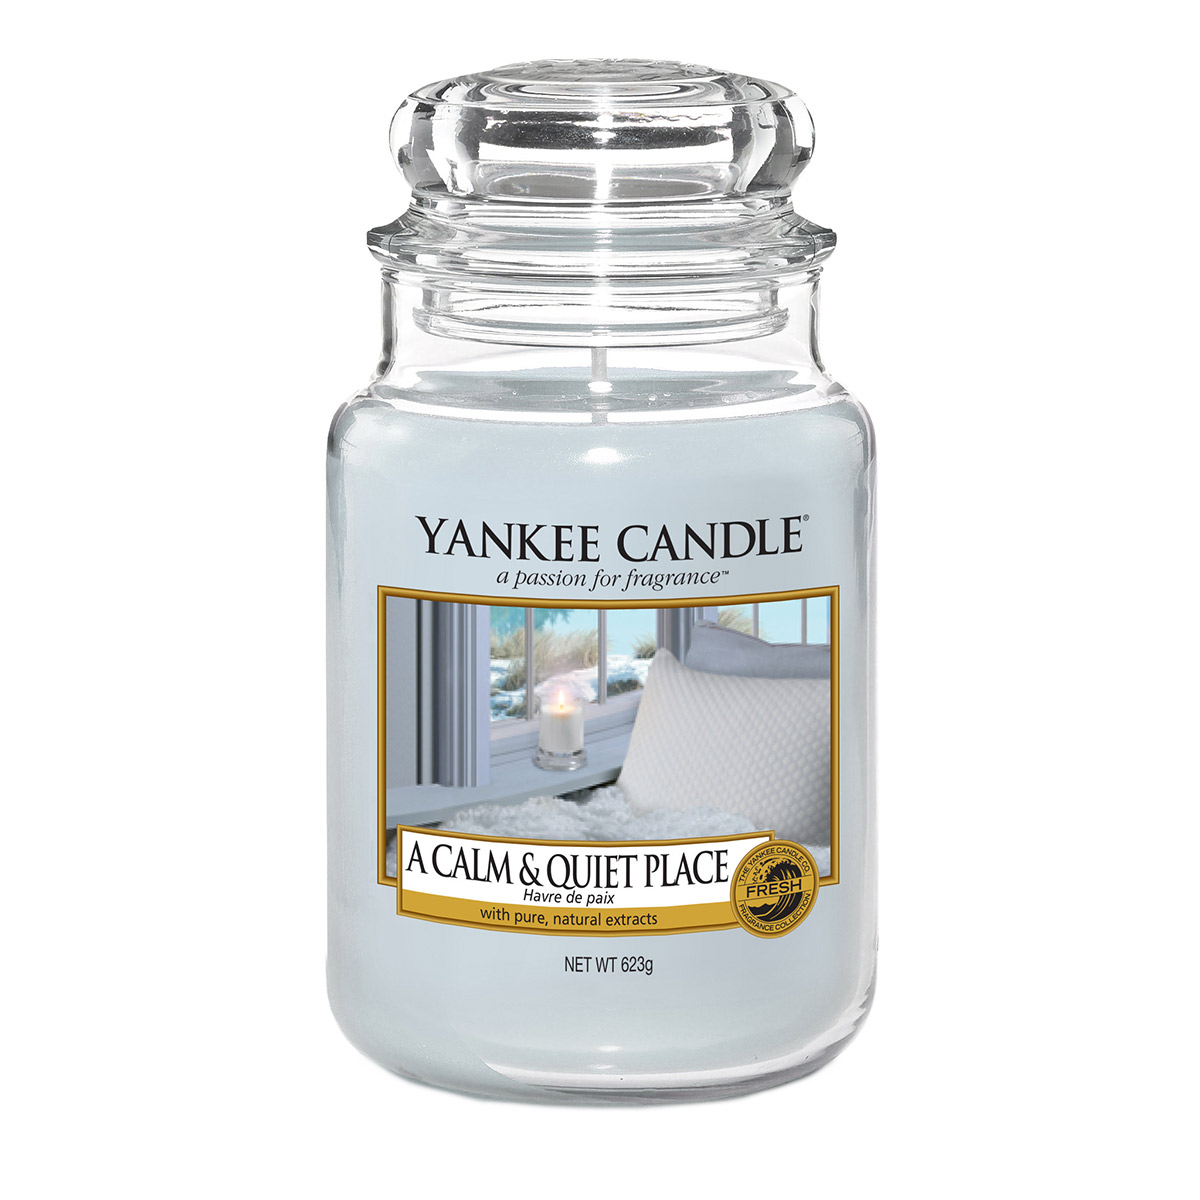 YANKEE CANDLE A CALM & QUIET PLACE 623G